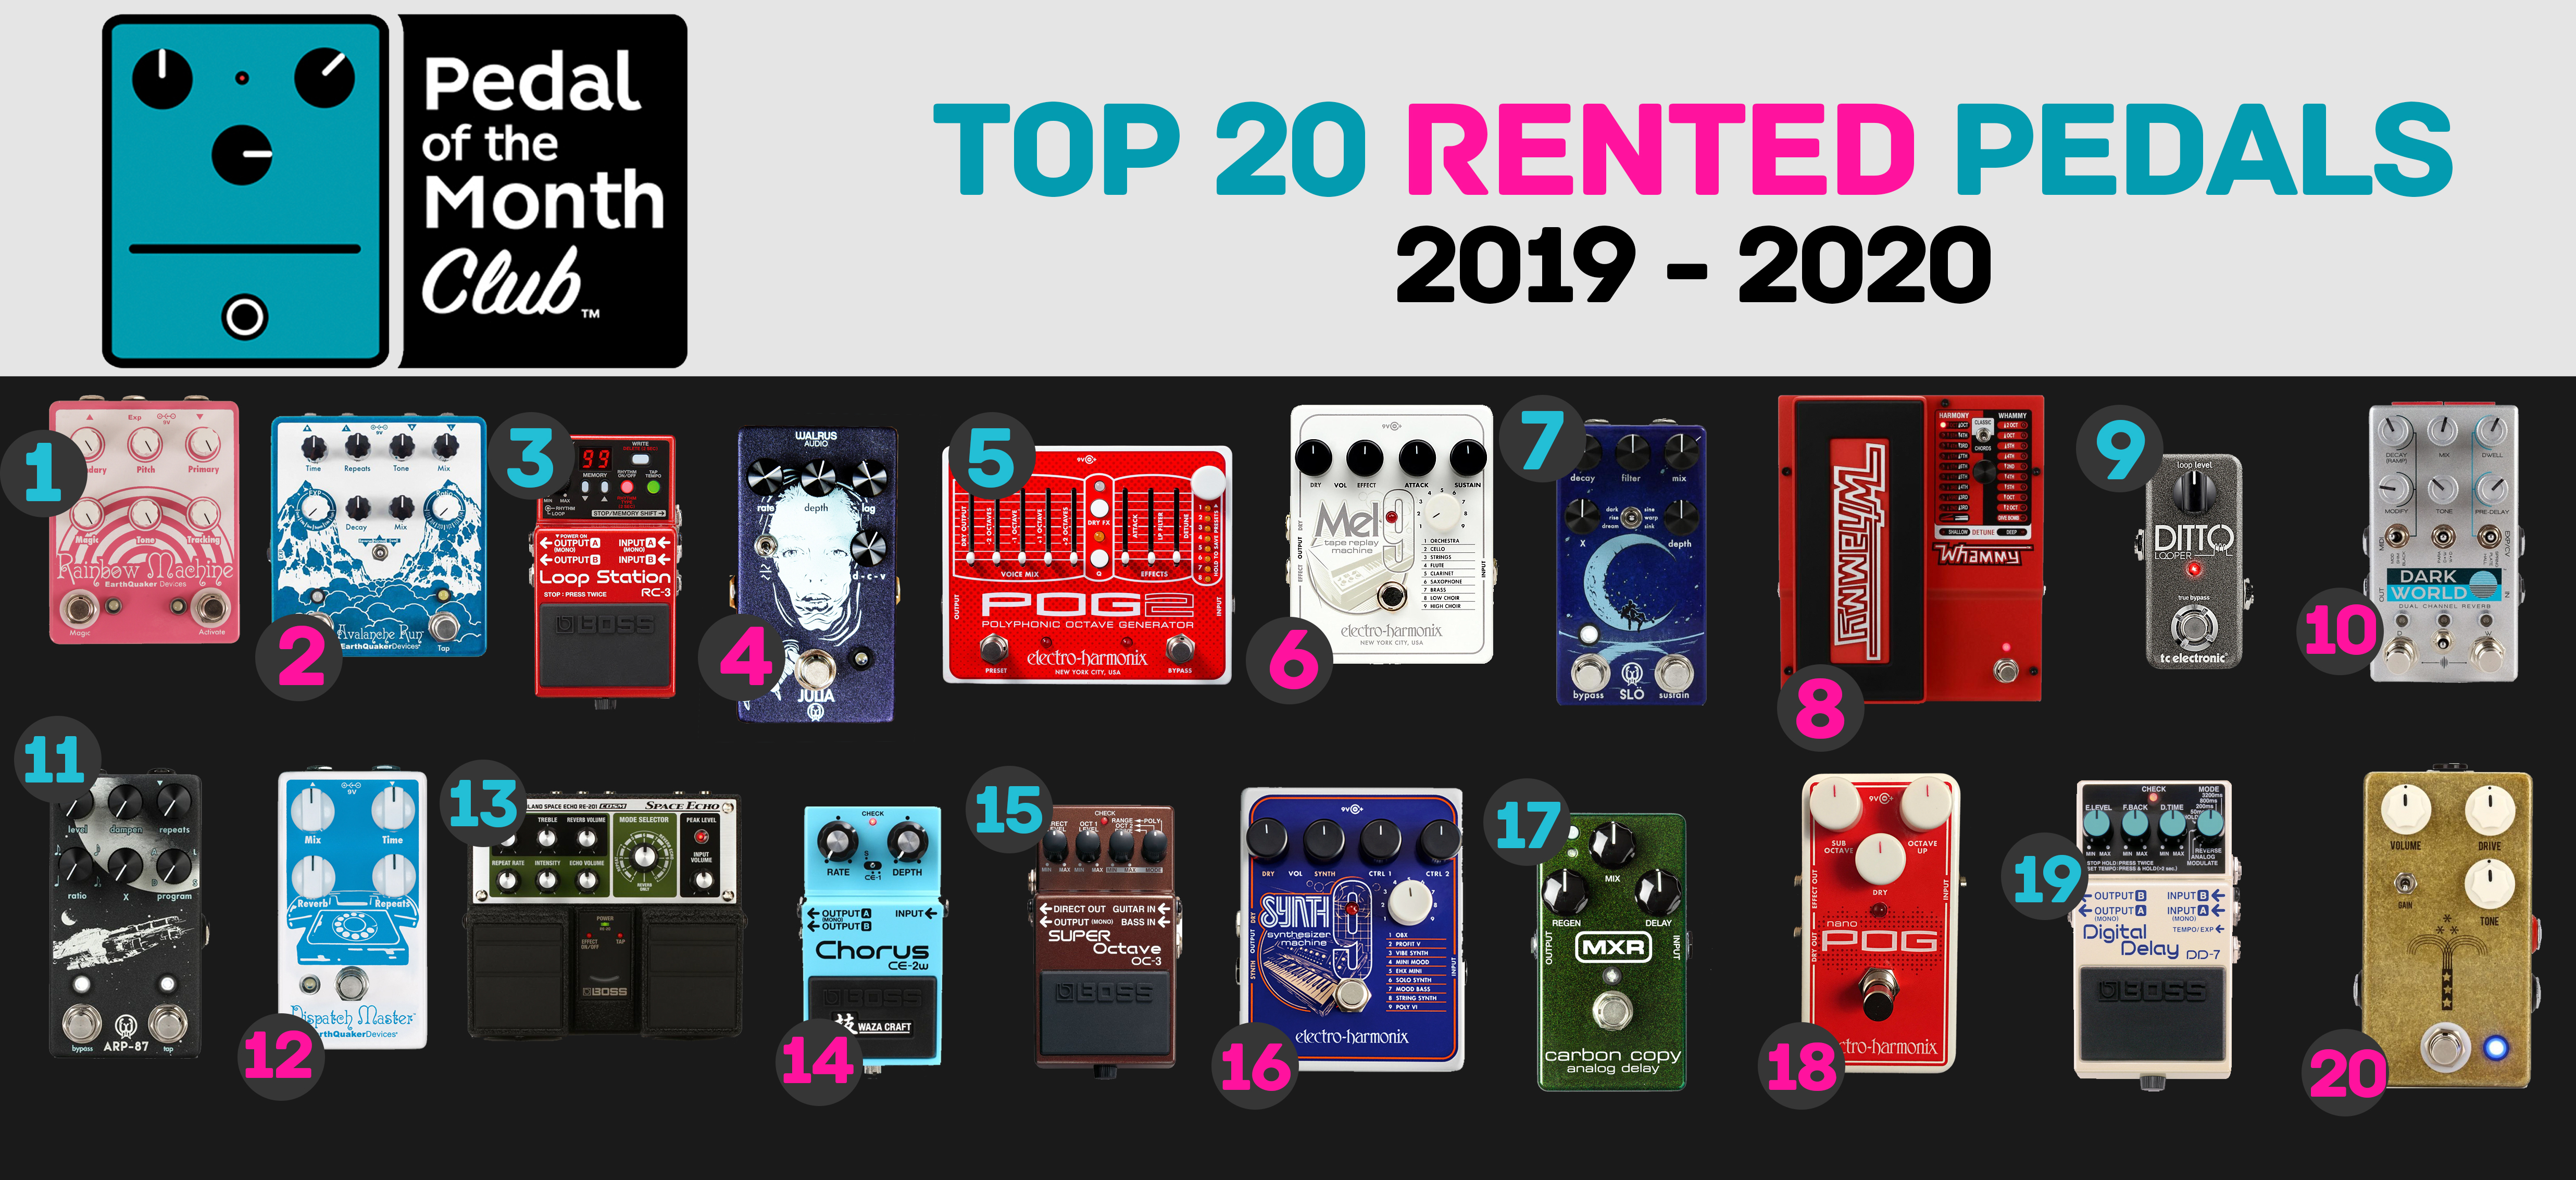 Greatest Hits of the Pedal of the Month Club 2020